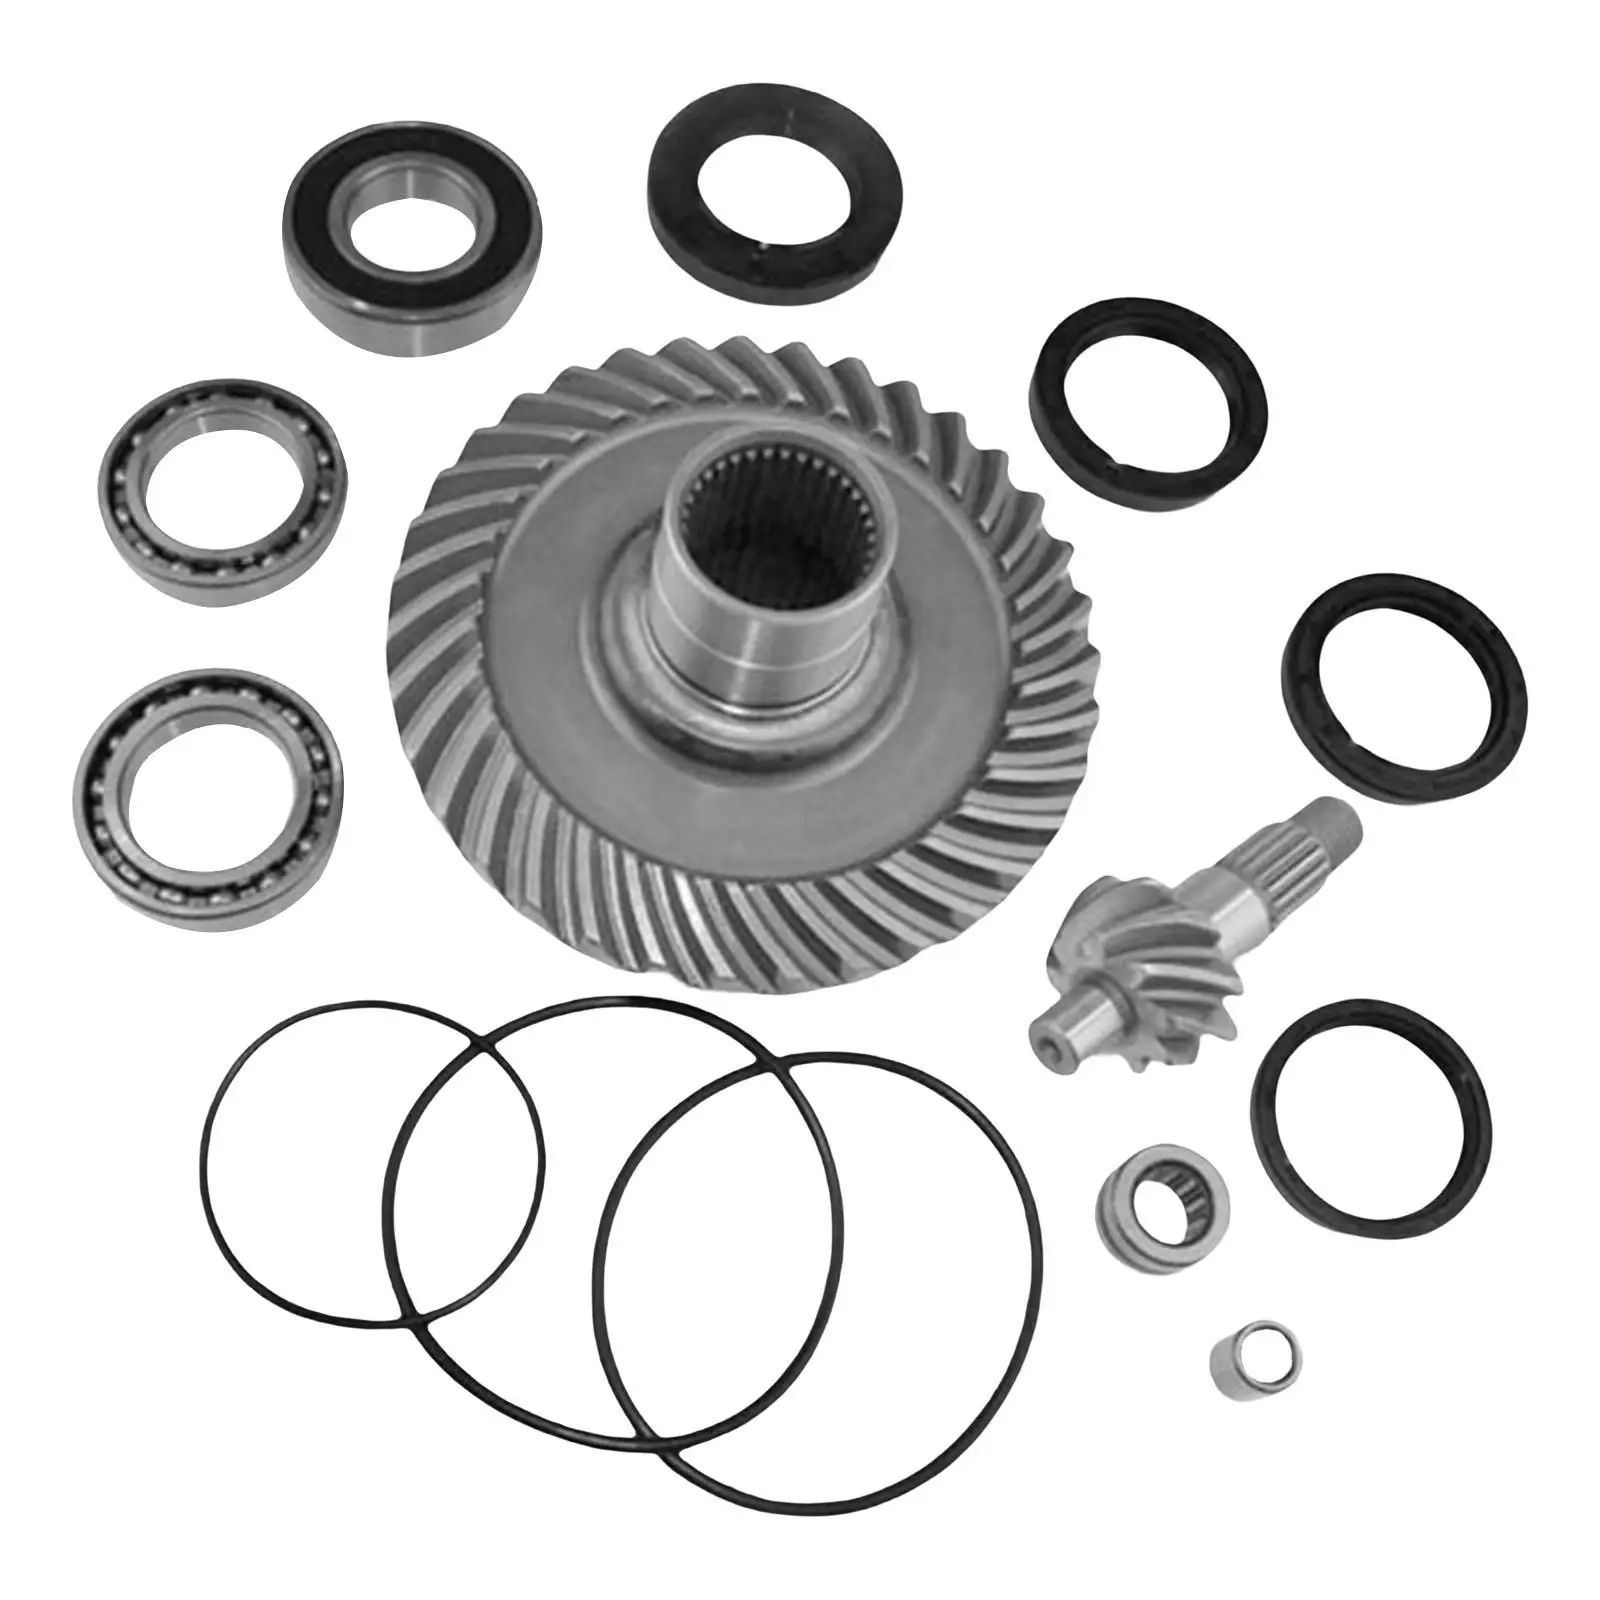 Rear Differential Ring Gear Kit Replacecment 127447 Fit for Honda TRX300FW Fourtrax 4x4 1988-2000